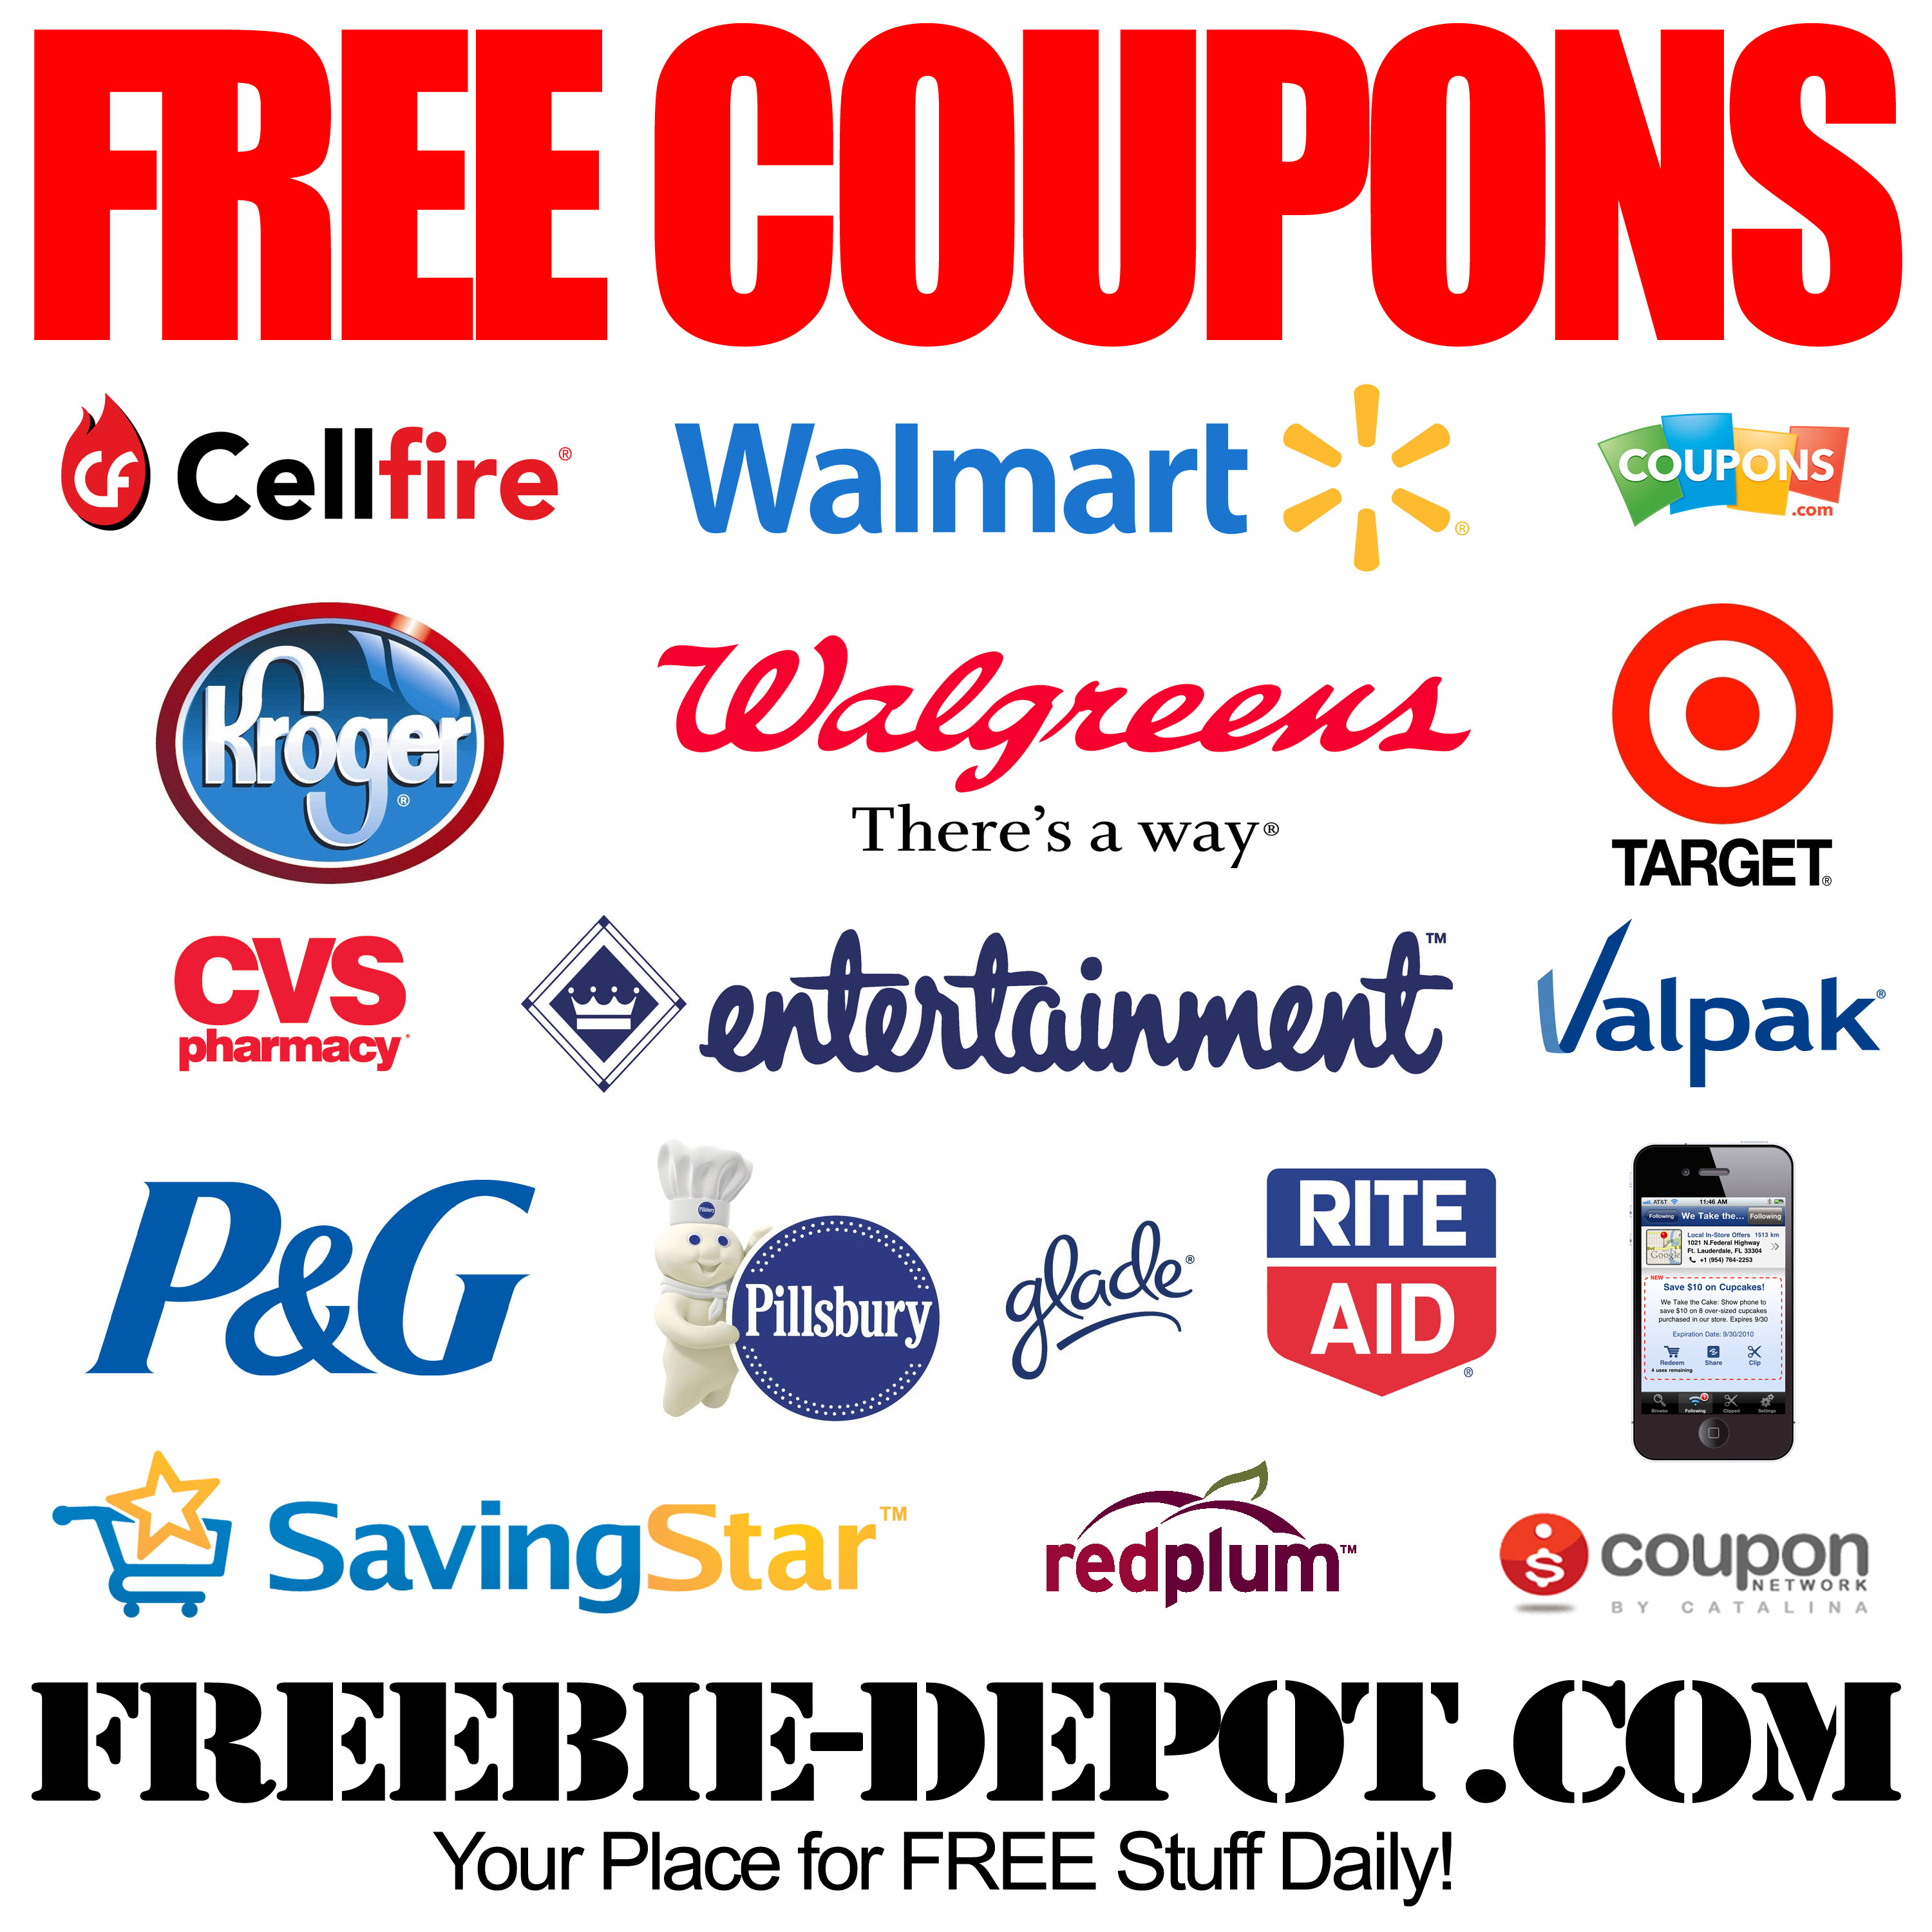 Free Coupon Codes – Best Quality Free Stuff - Free Printable Coupons 2014